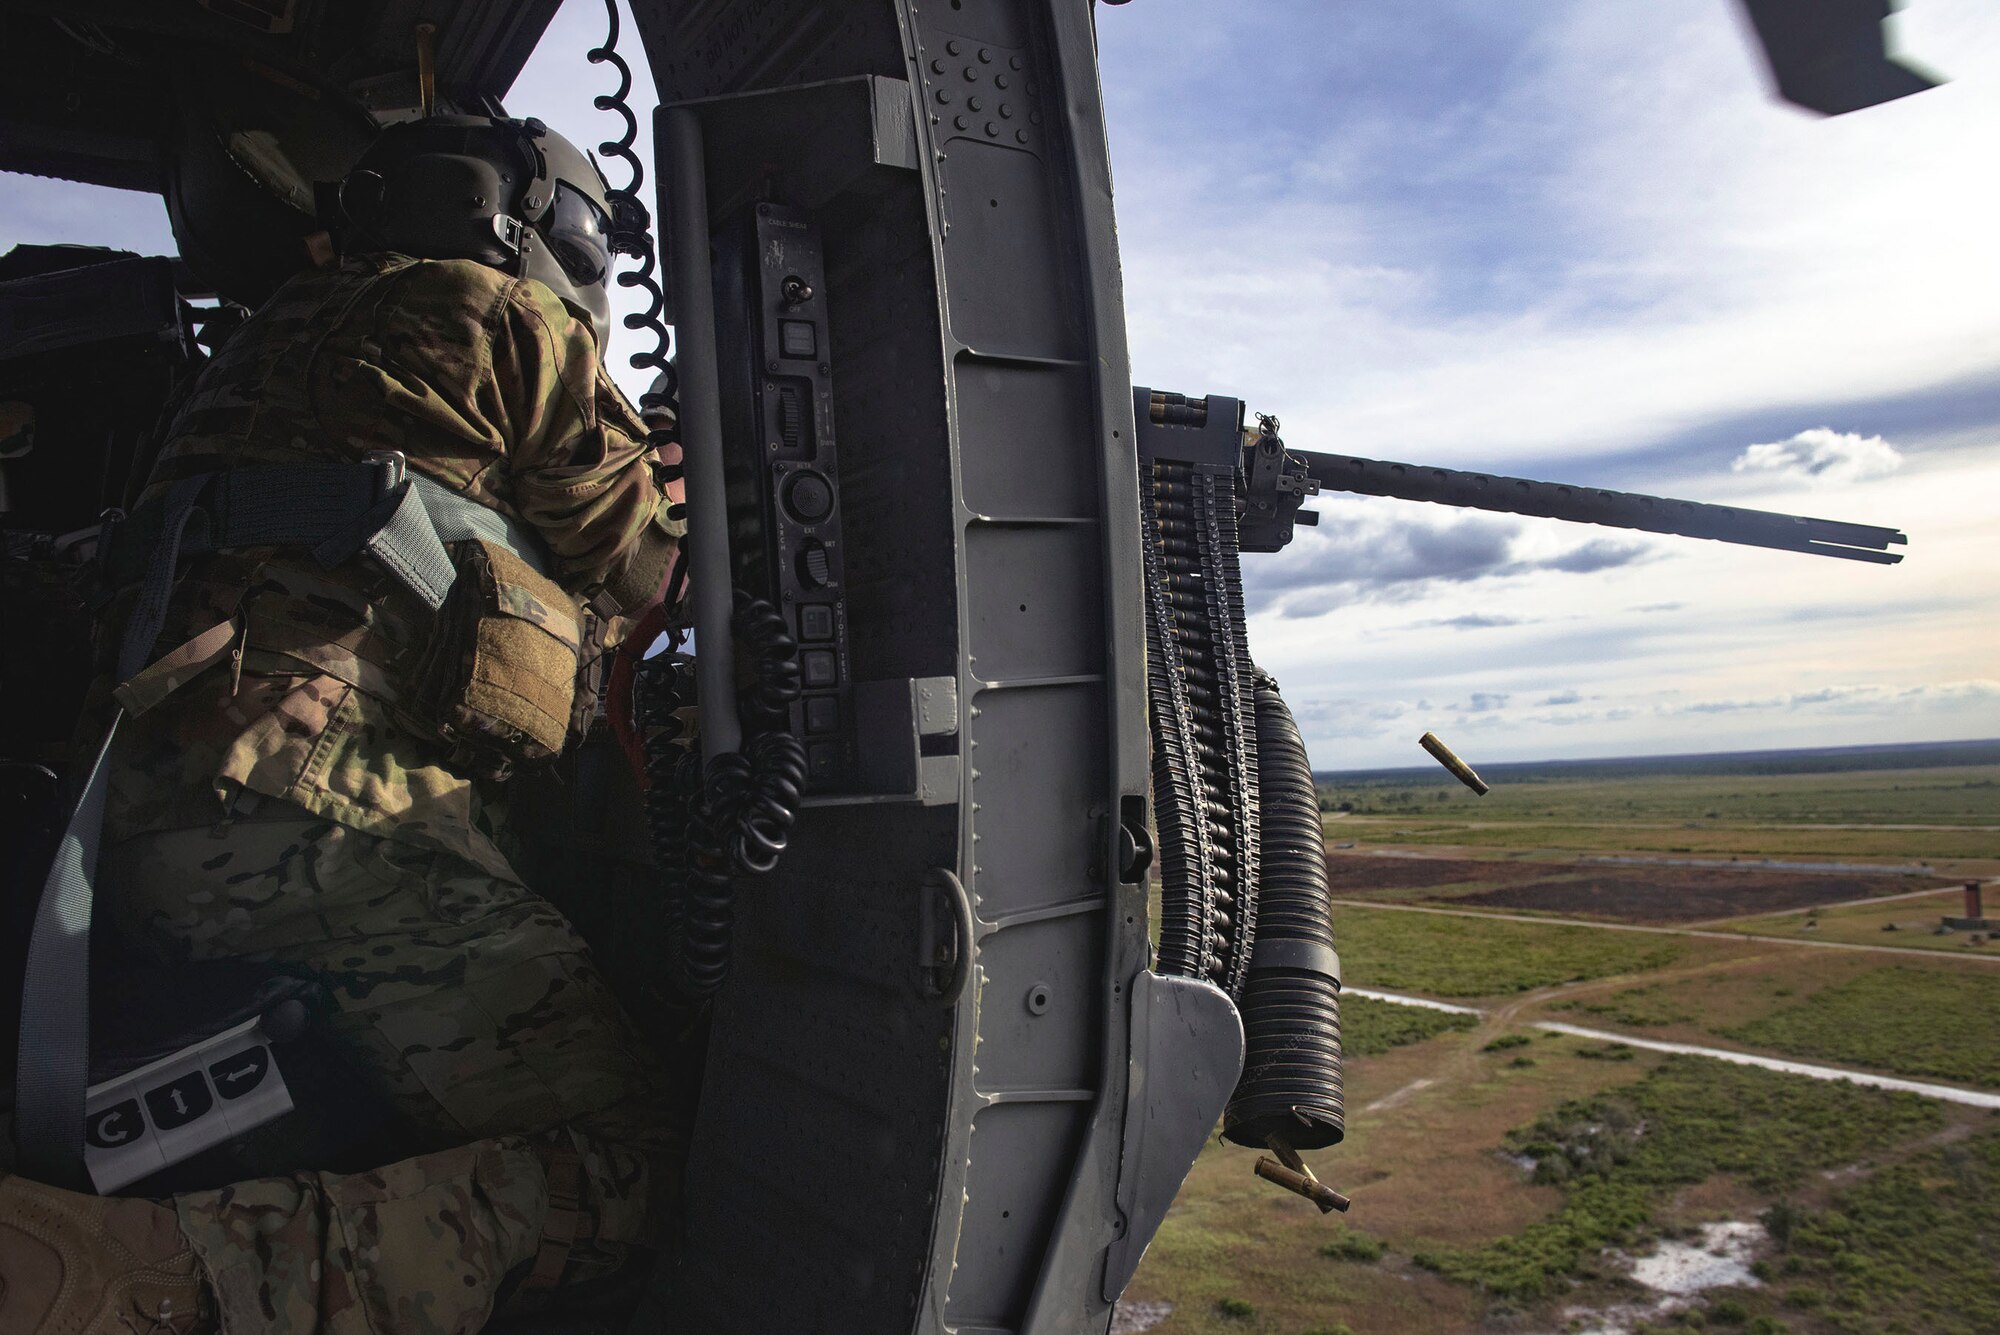 A 41st Rescue Squadron (RQS) special missions aviator fires an M2 machine gun from an HH-60G Pave Hawk during pre-deployment ‘spin-up’ training, Dec. 12, 2018, at Avon Park Air Force Range, Fla. During this pre-deployment ‘spin-up’ training, Moody’s 347th Rescue Group tested and maximized their combat search and rescue (CSAR) and personnel recovery capabilities. Under normal circumstances, the HH-60G Pave Hawk helicopter crews and maintainers deploy from Moody and integrate with Guardian Angel teams from different bases. This time, Moody’s 38th RQS and 41st RQS’s will deploy together and utilized this exercise to improve their mission readiness and cohesion before their departure. (U.S. Air Force photo by Senior Airman Greg Nash)